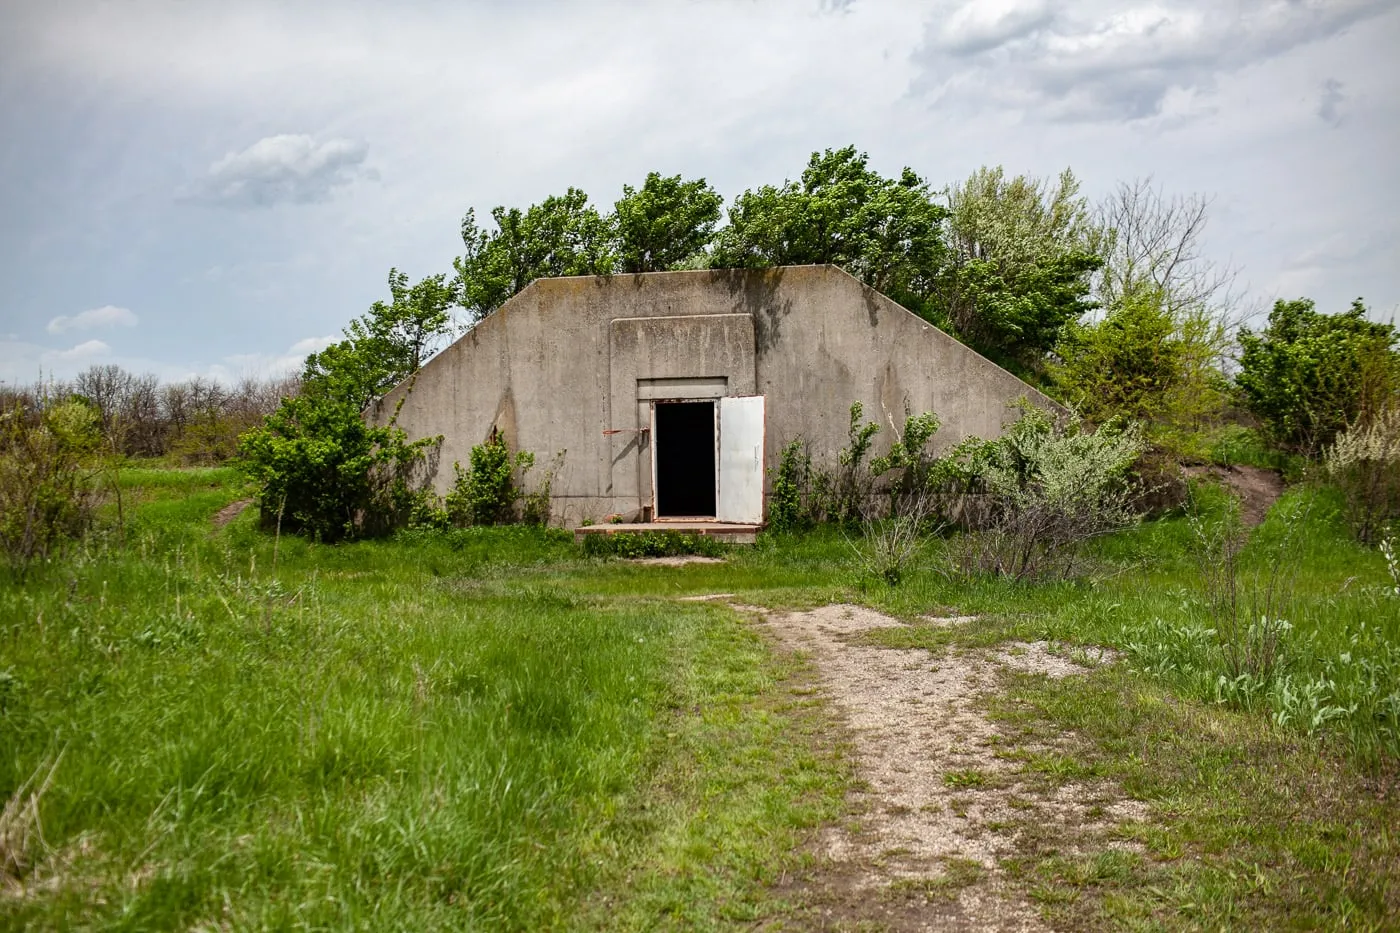 Army bunker at Midewin National Tallgrass Prairie in Wilmington, Illinois. See Bison in Illinois.